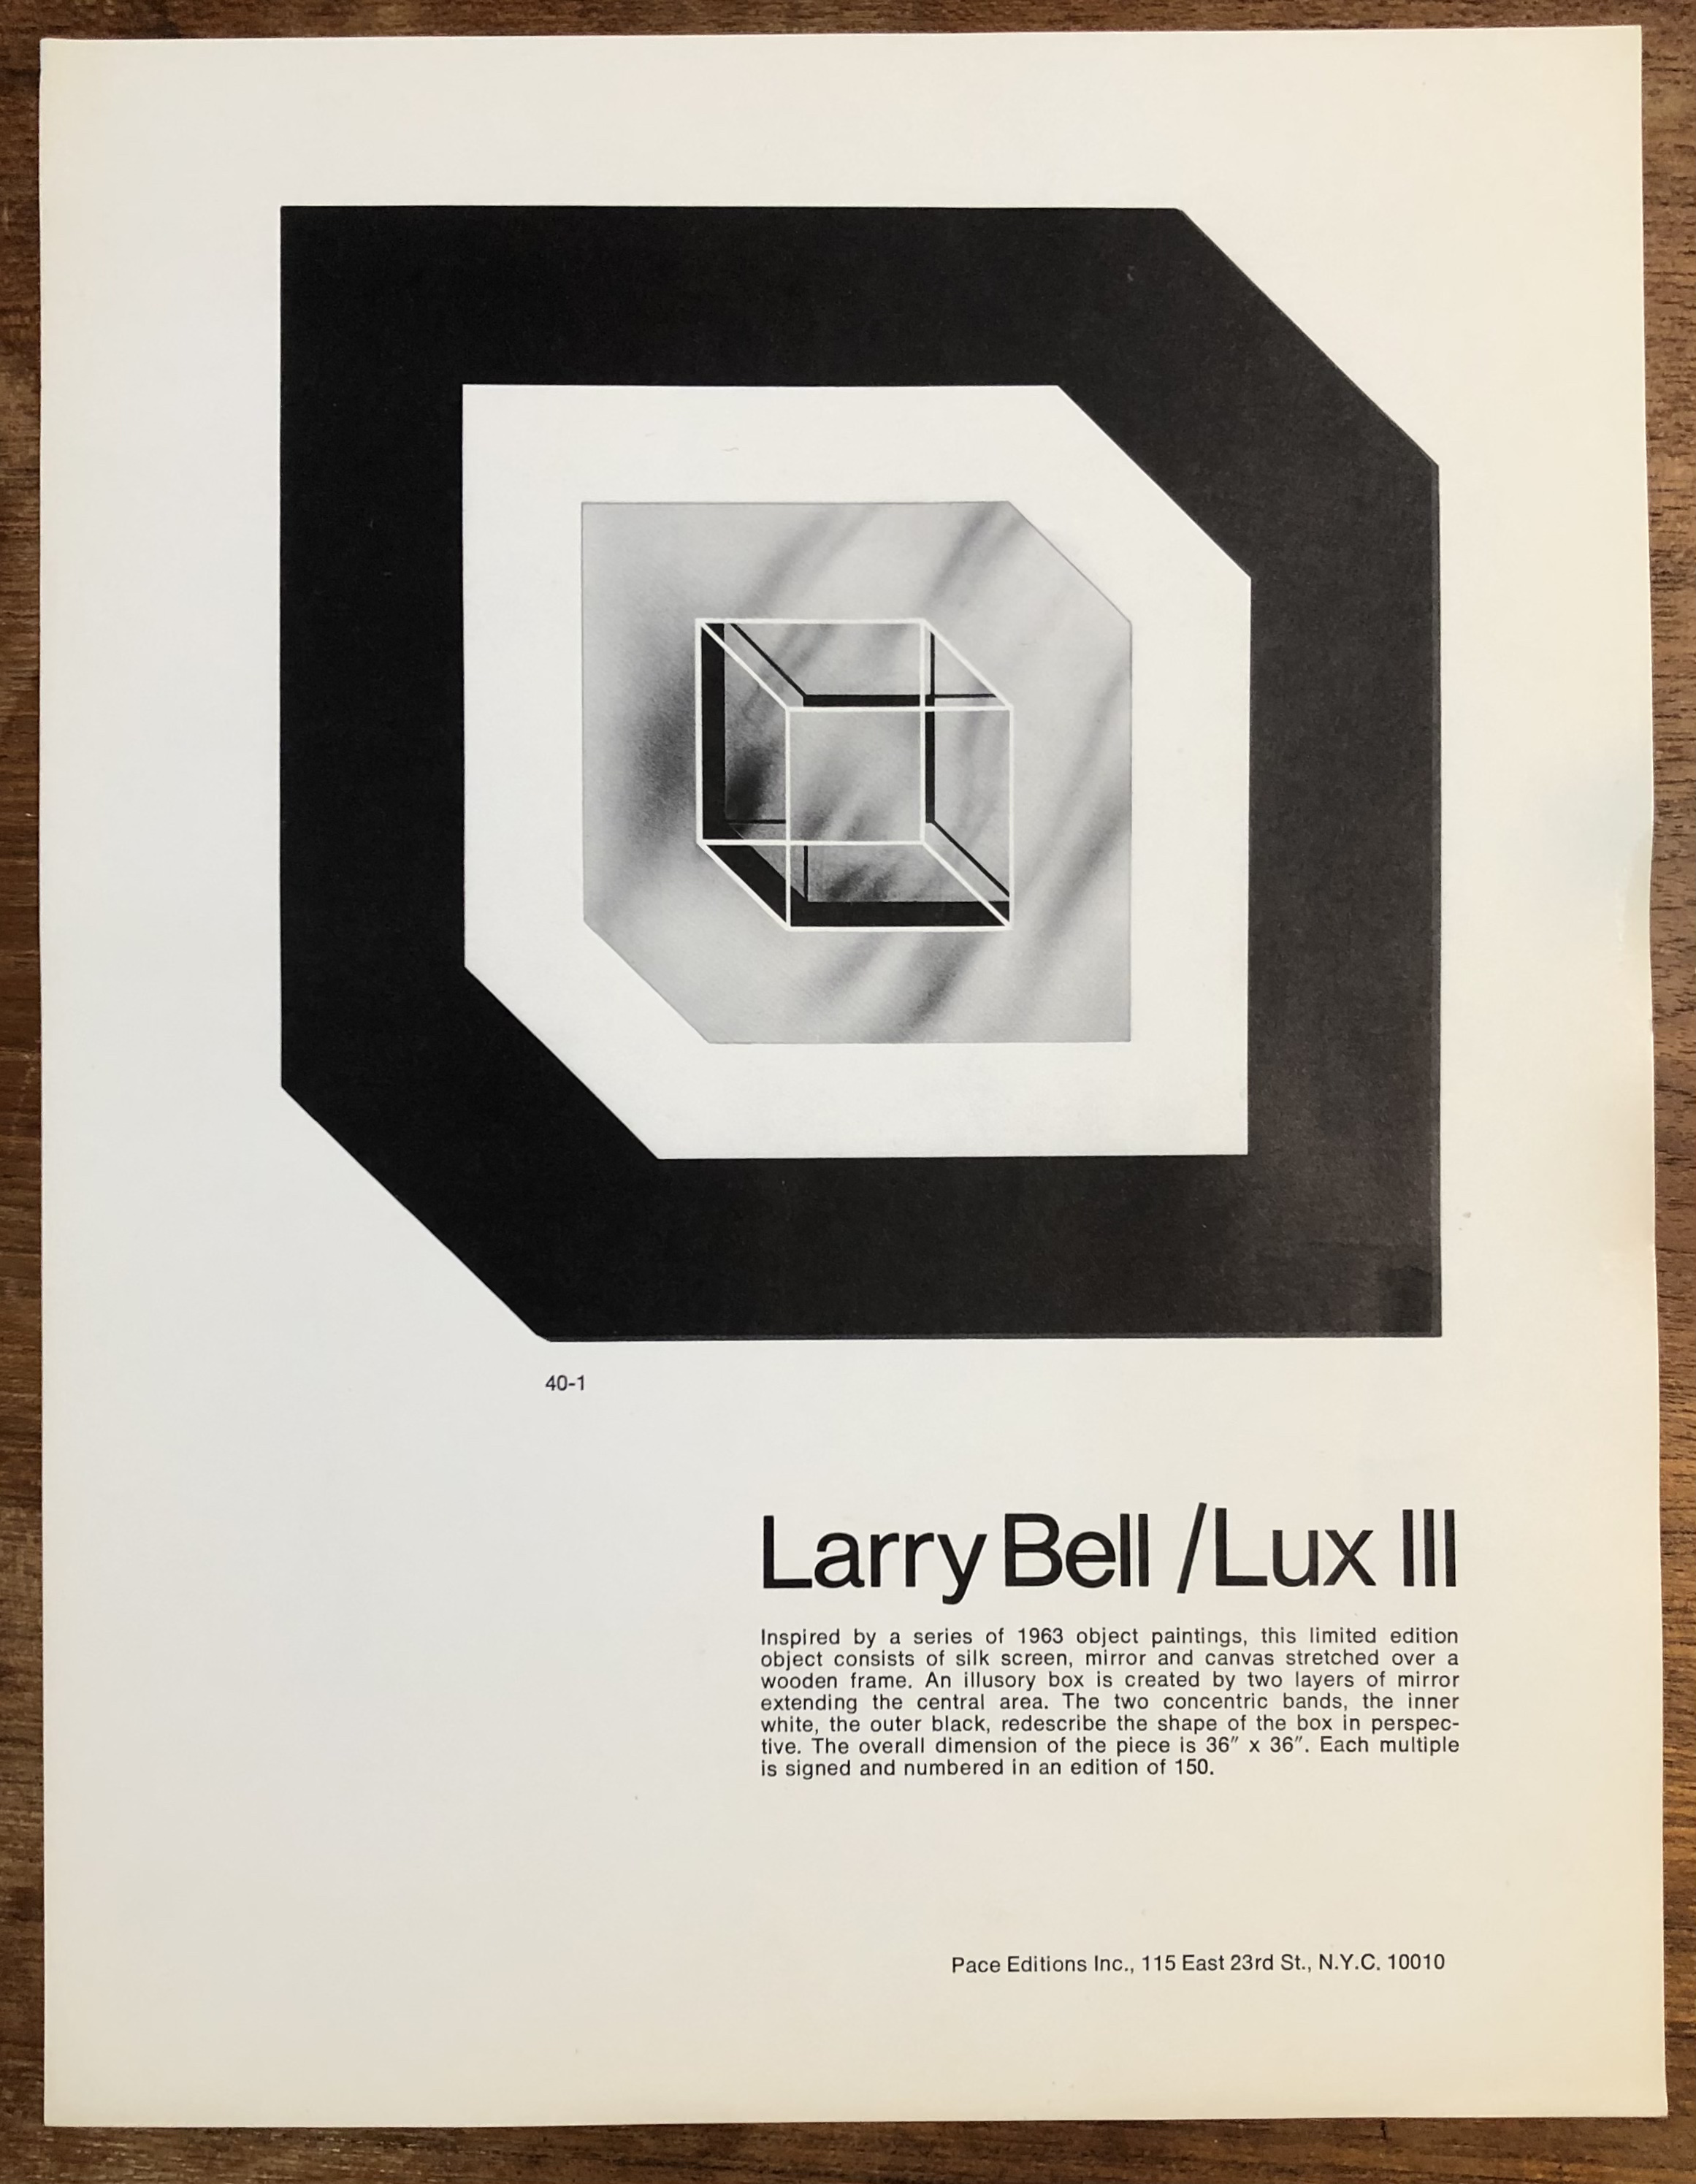 Larry Bell. Lux III. Pace Editions, New York, [1971]